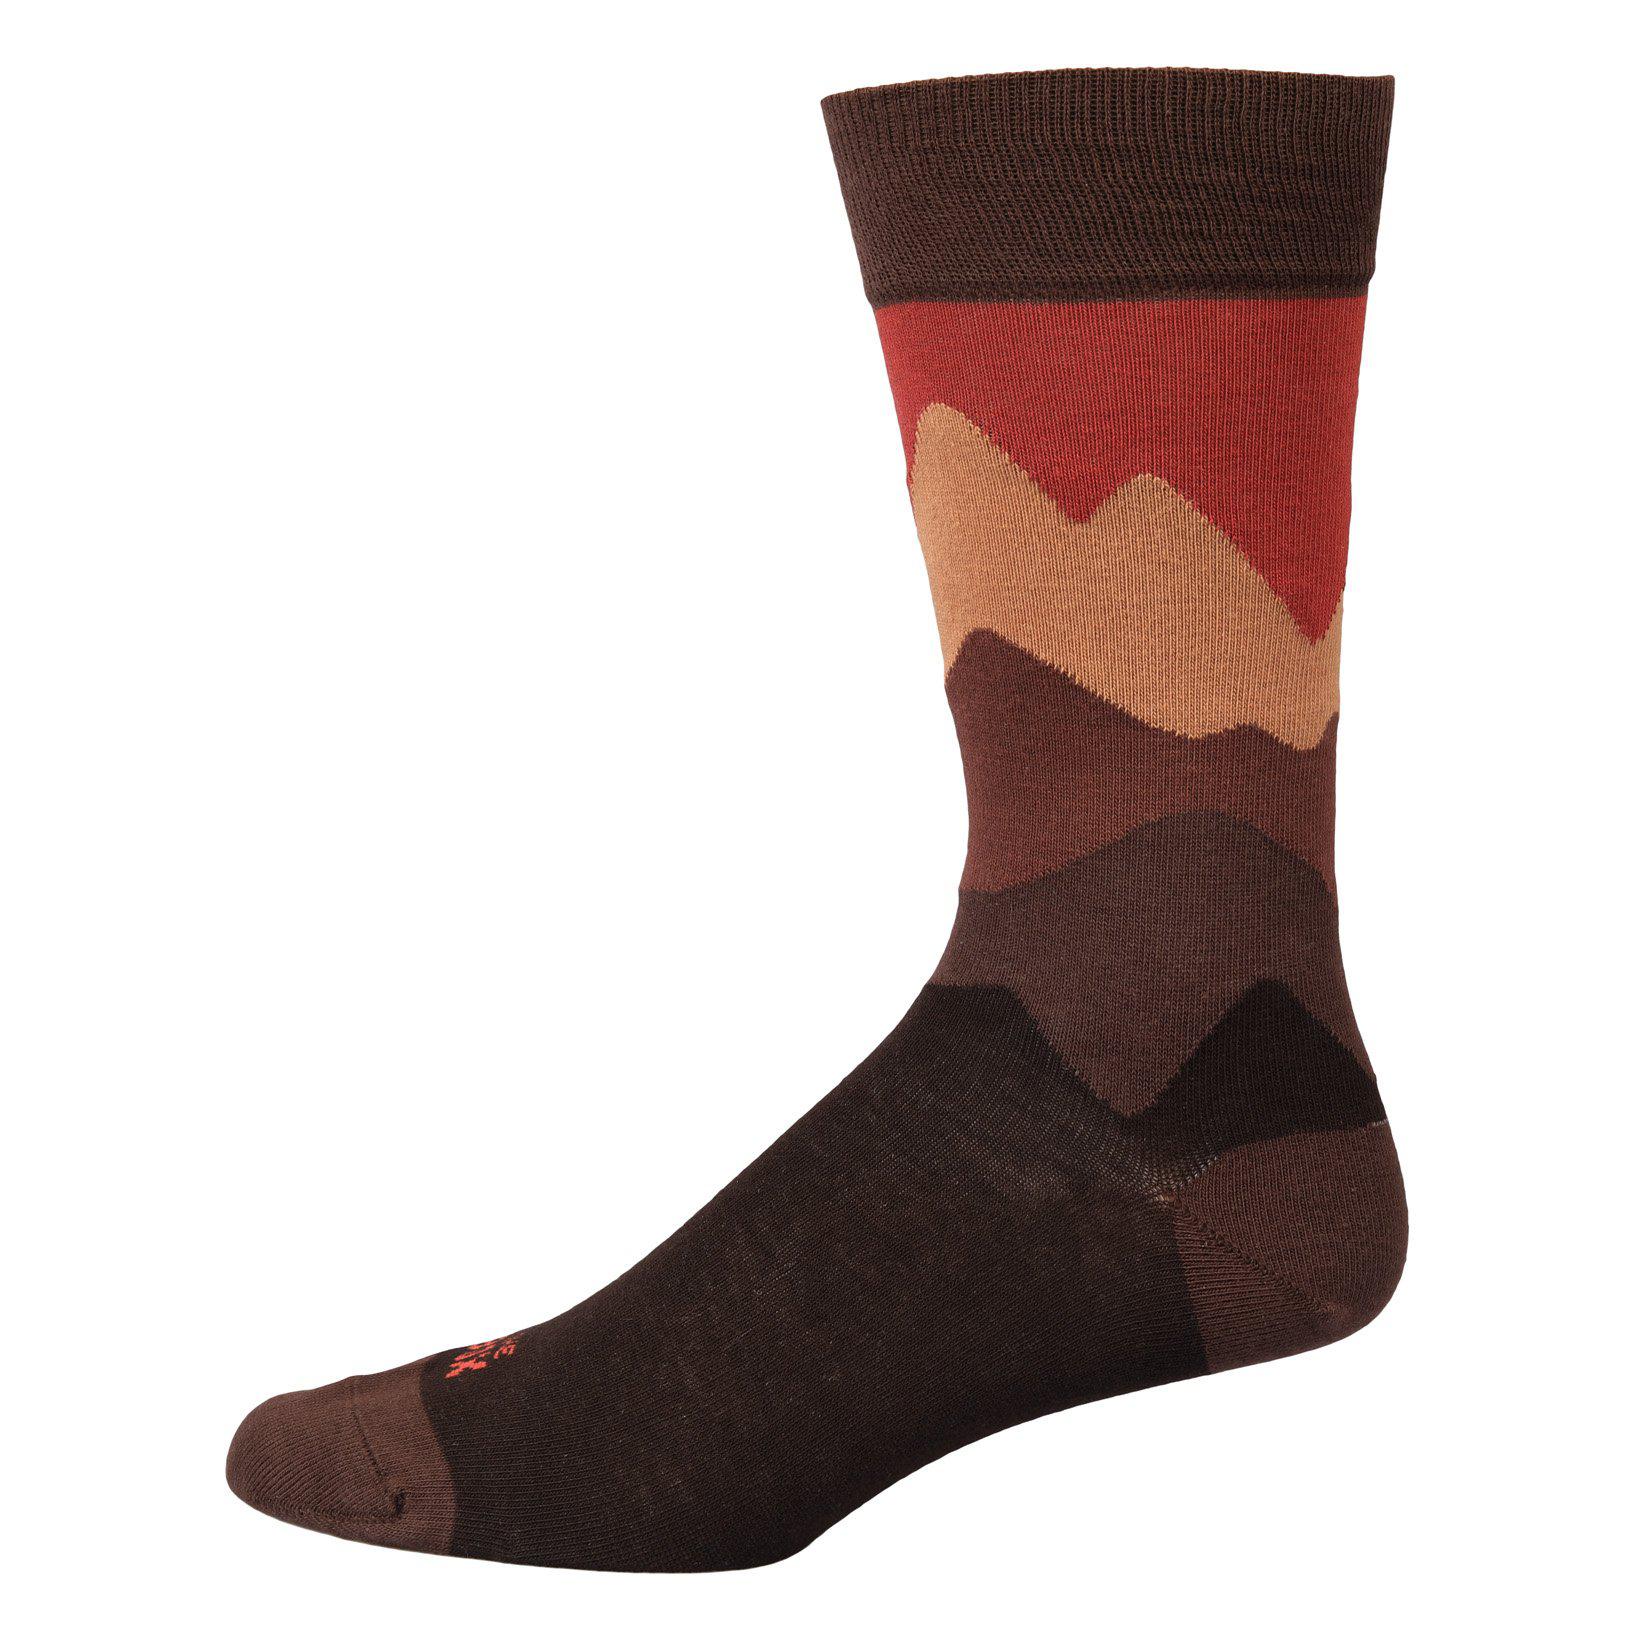 Mountains Short Socks-In the box-Conrad Hasselbach Shoes & Garment